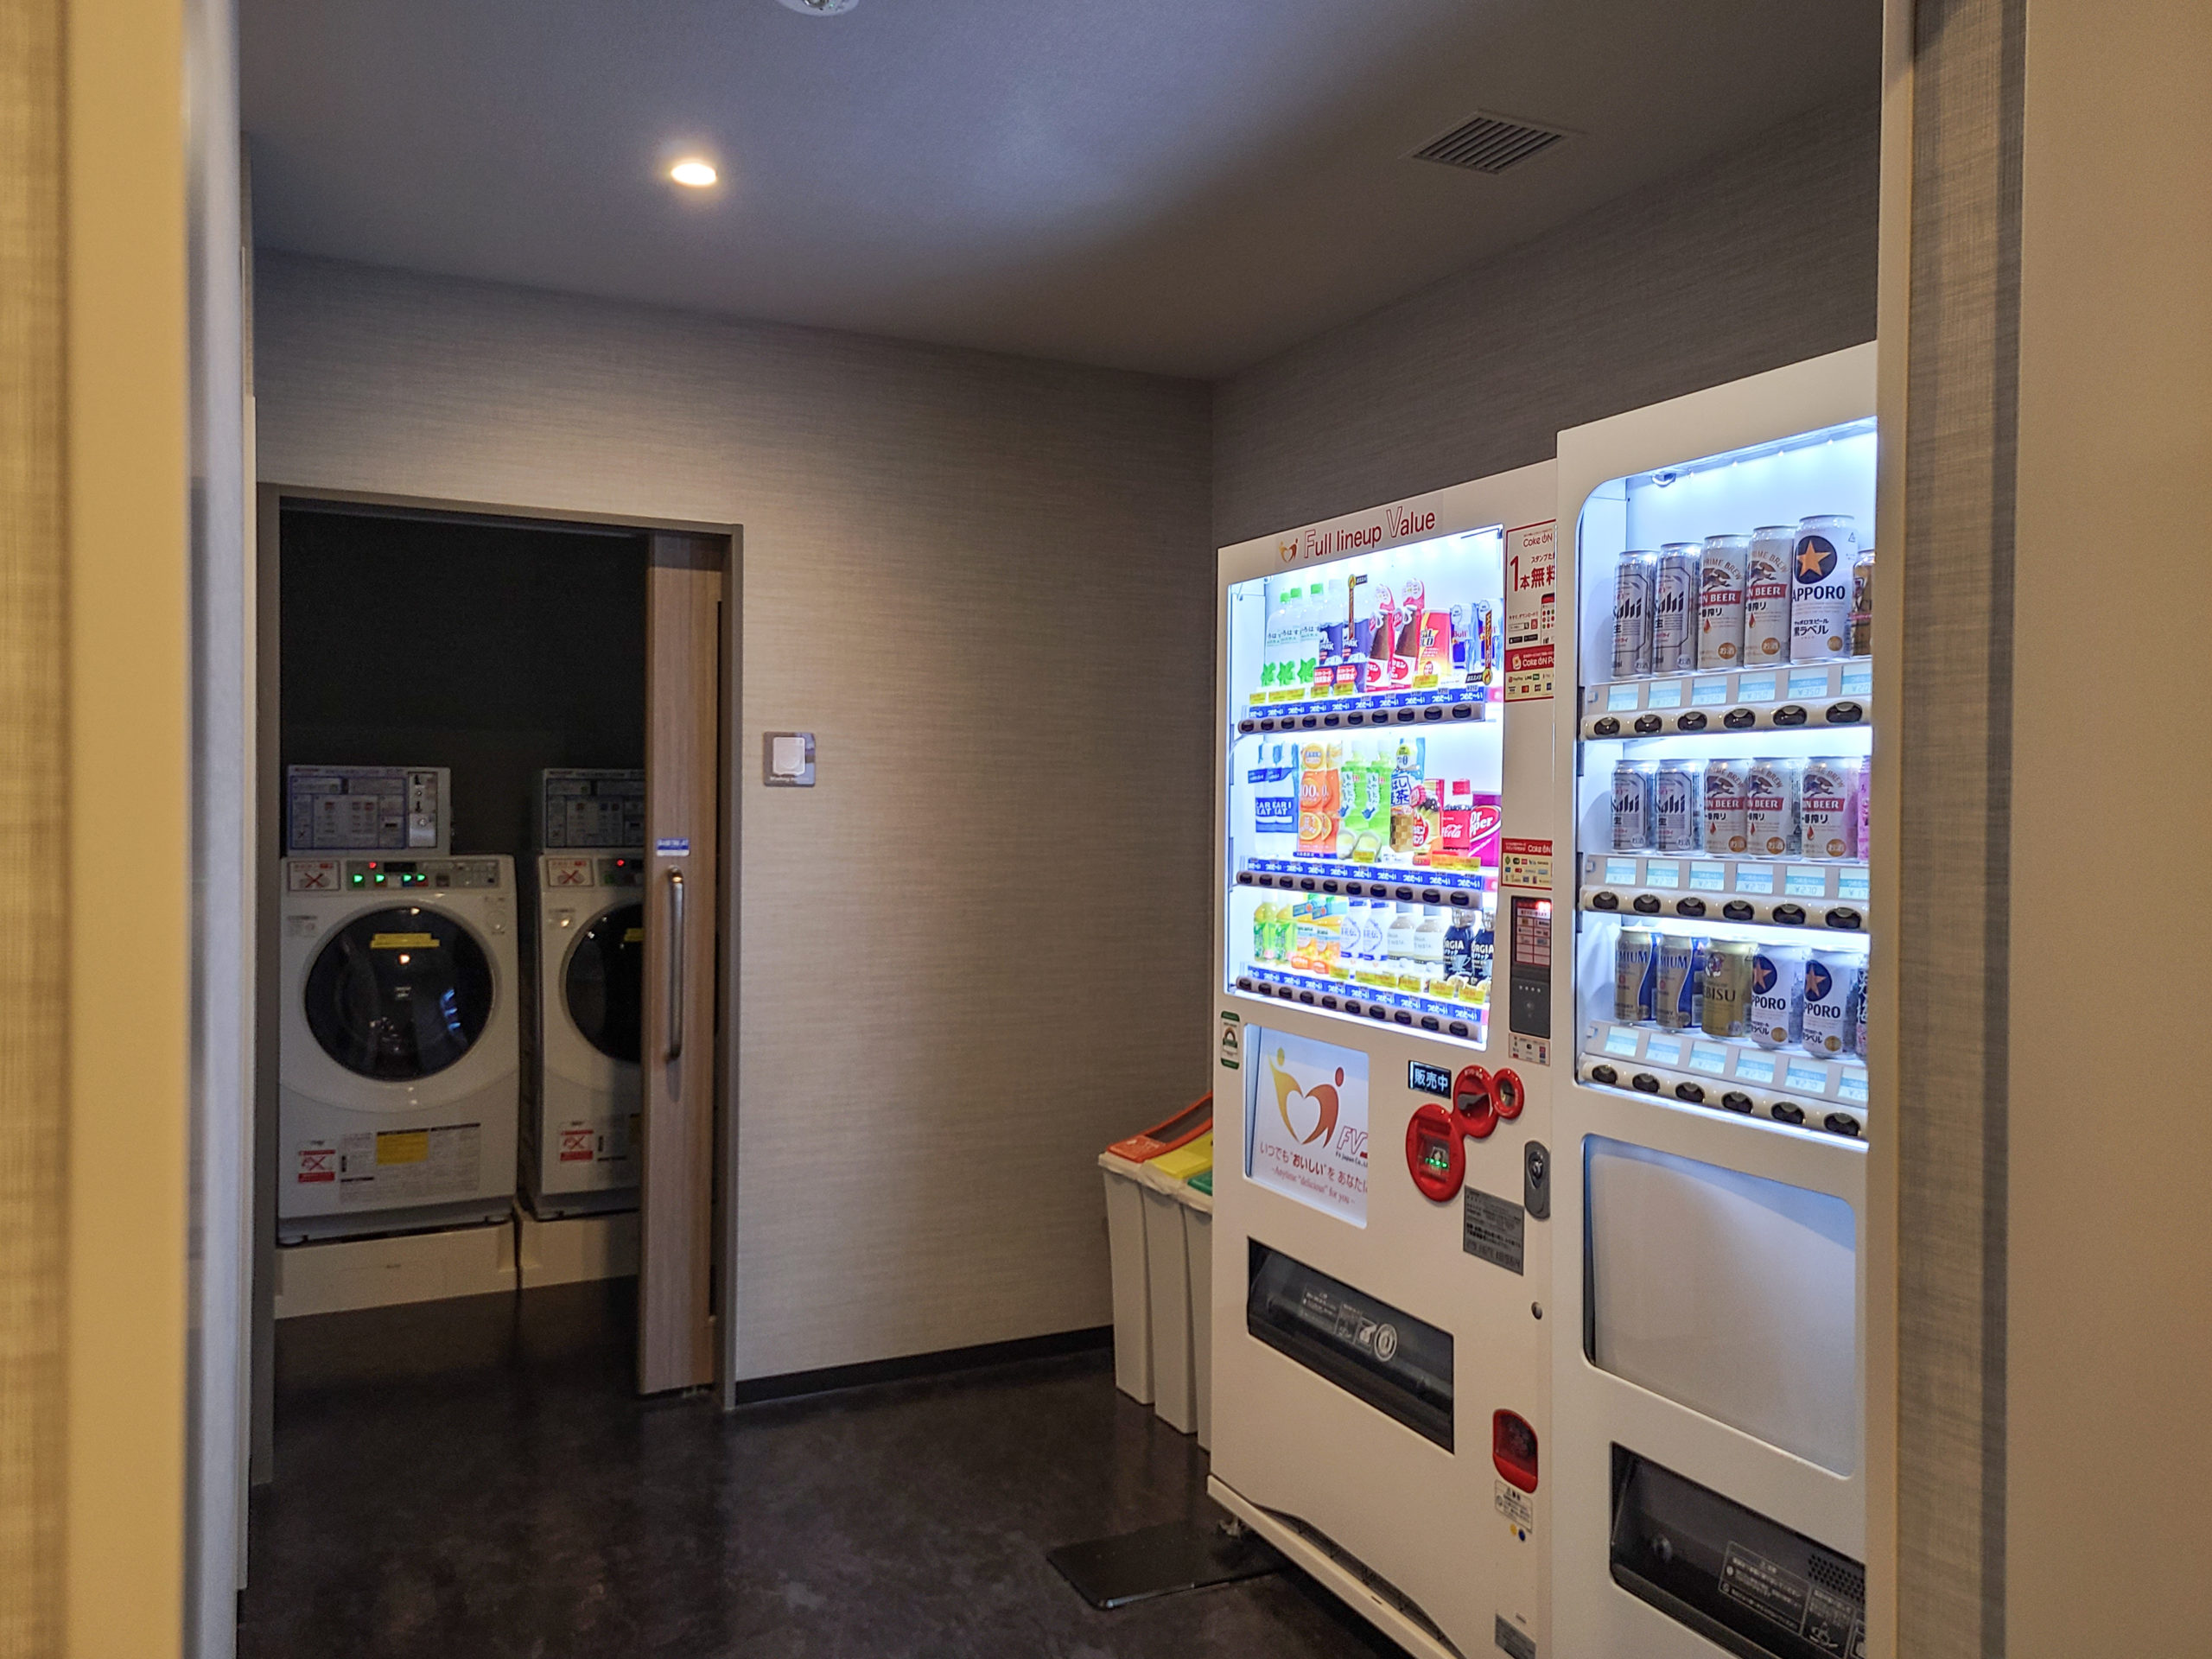 Laundry machines perfect for guests who stay long-term